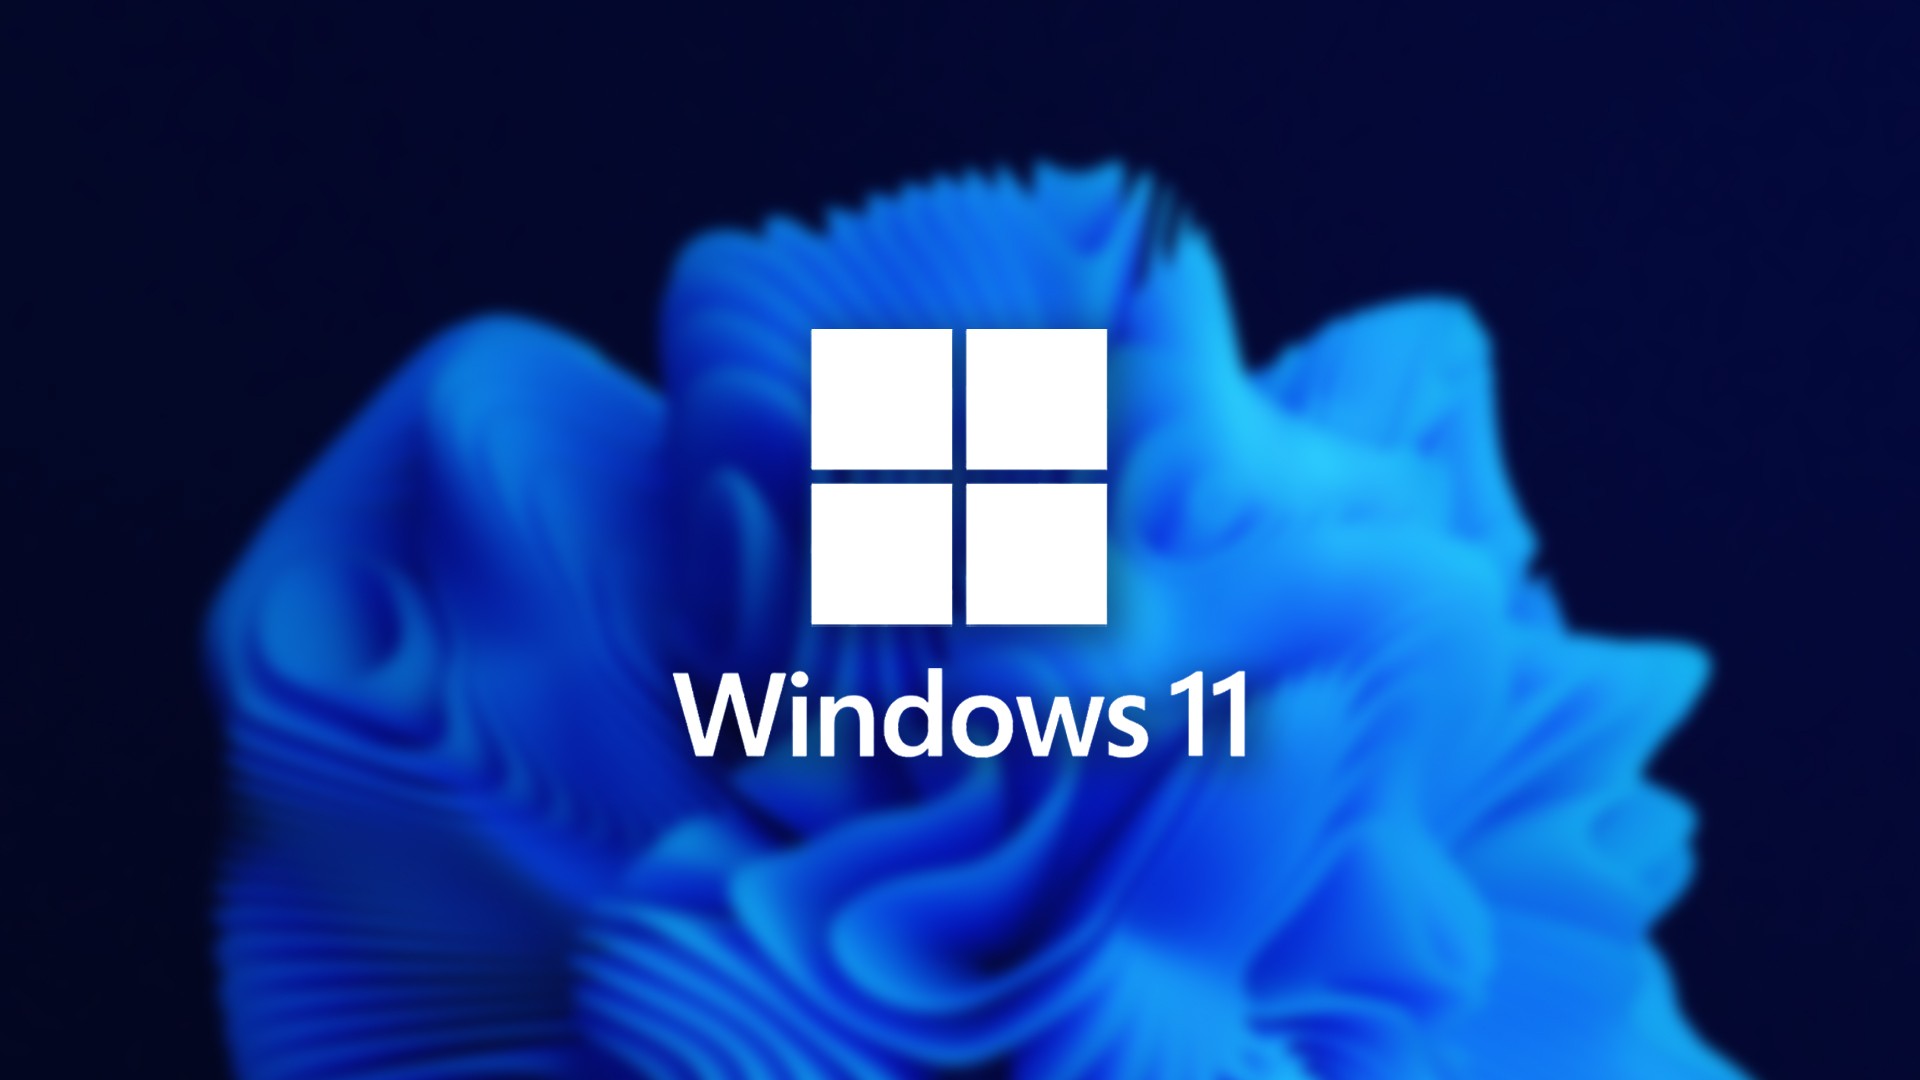 Windows 11 22H2 will have new memory encryption feature on 12th generation Intel Core PCs
